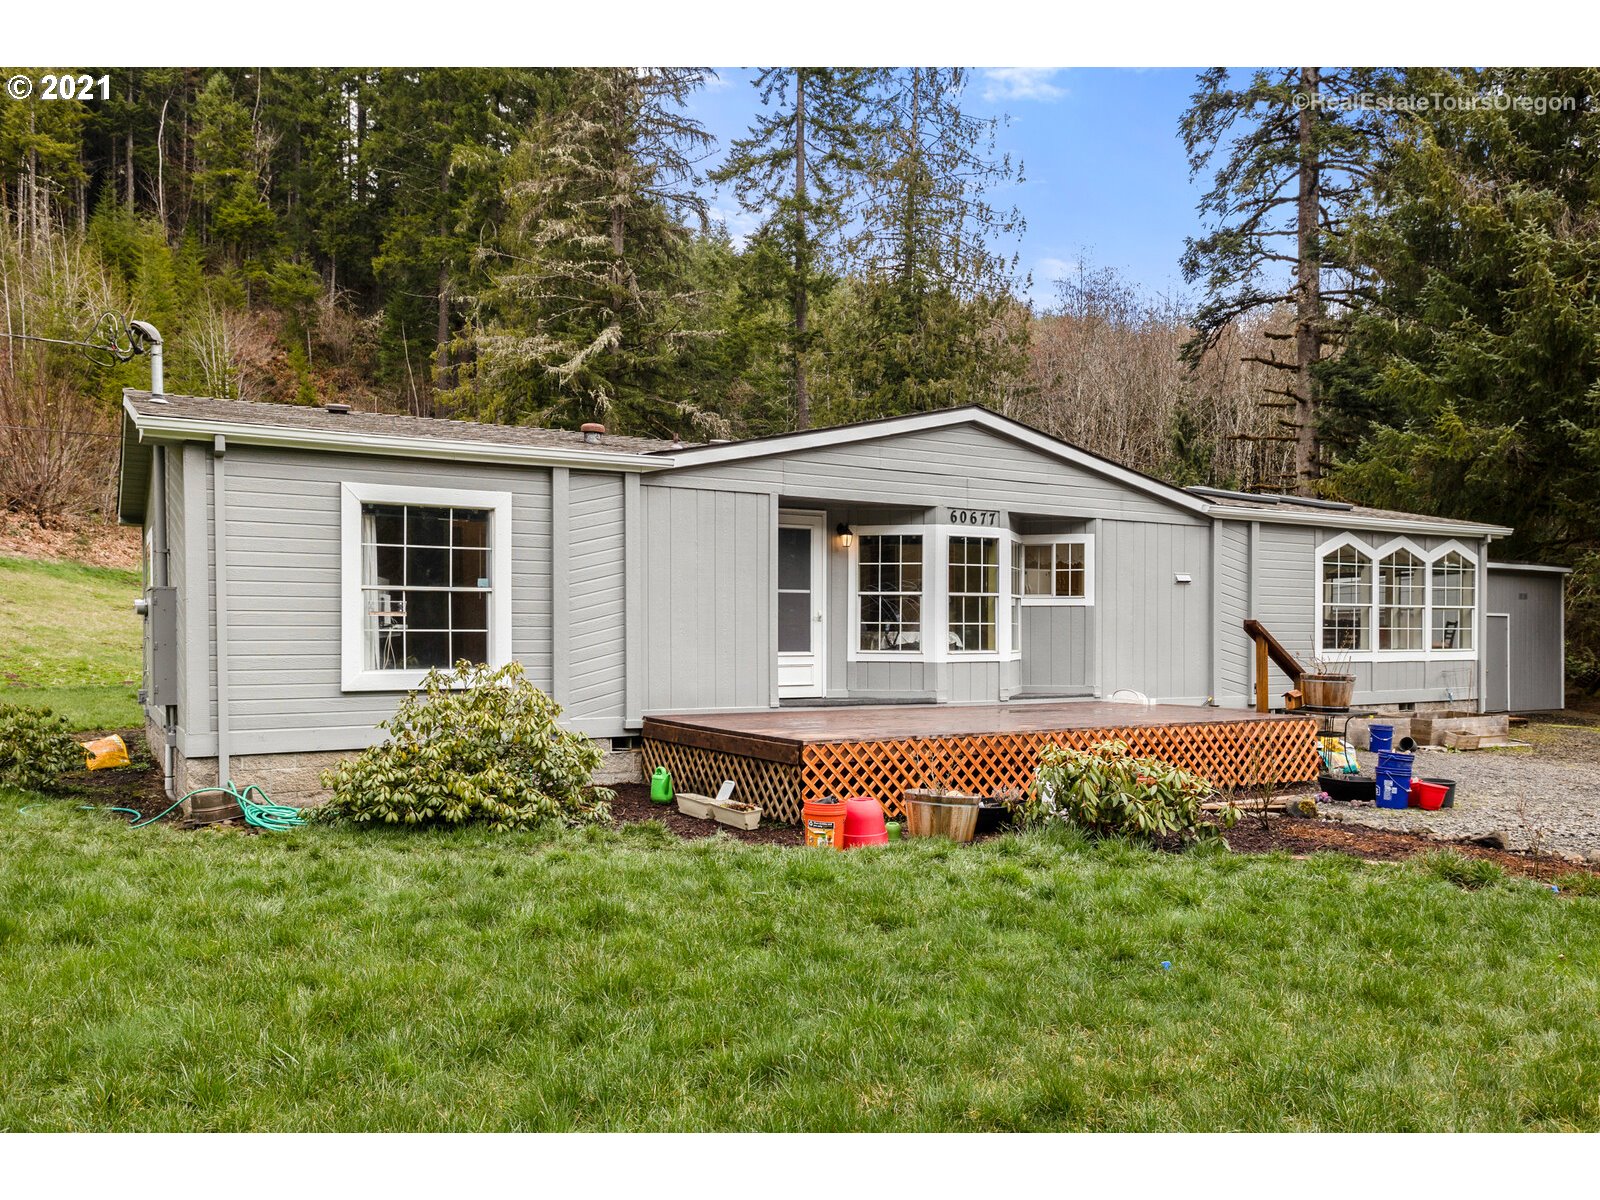 60677 NW AGAARD RD (1 of 32)